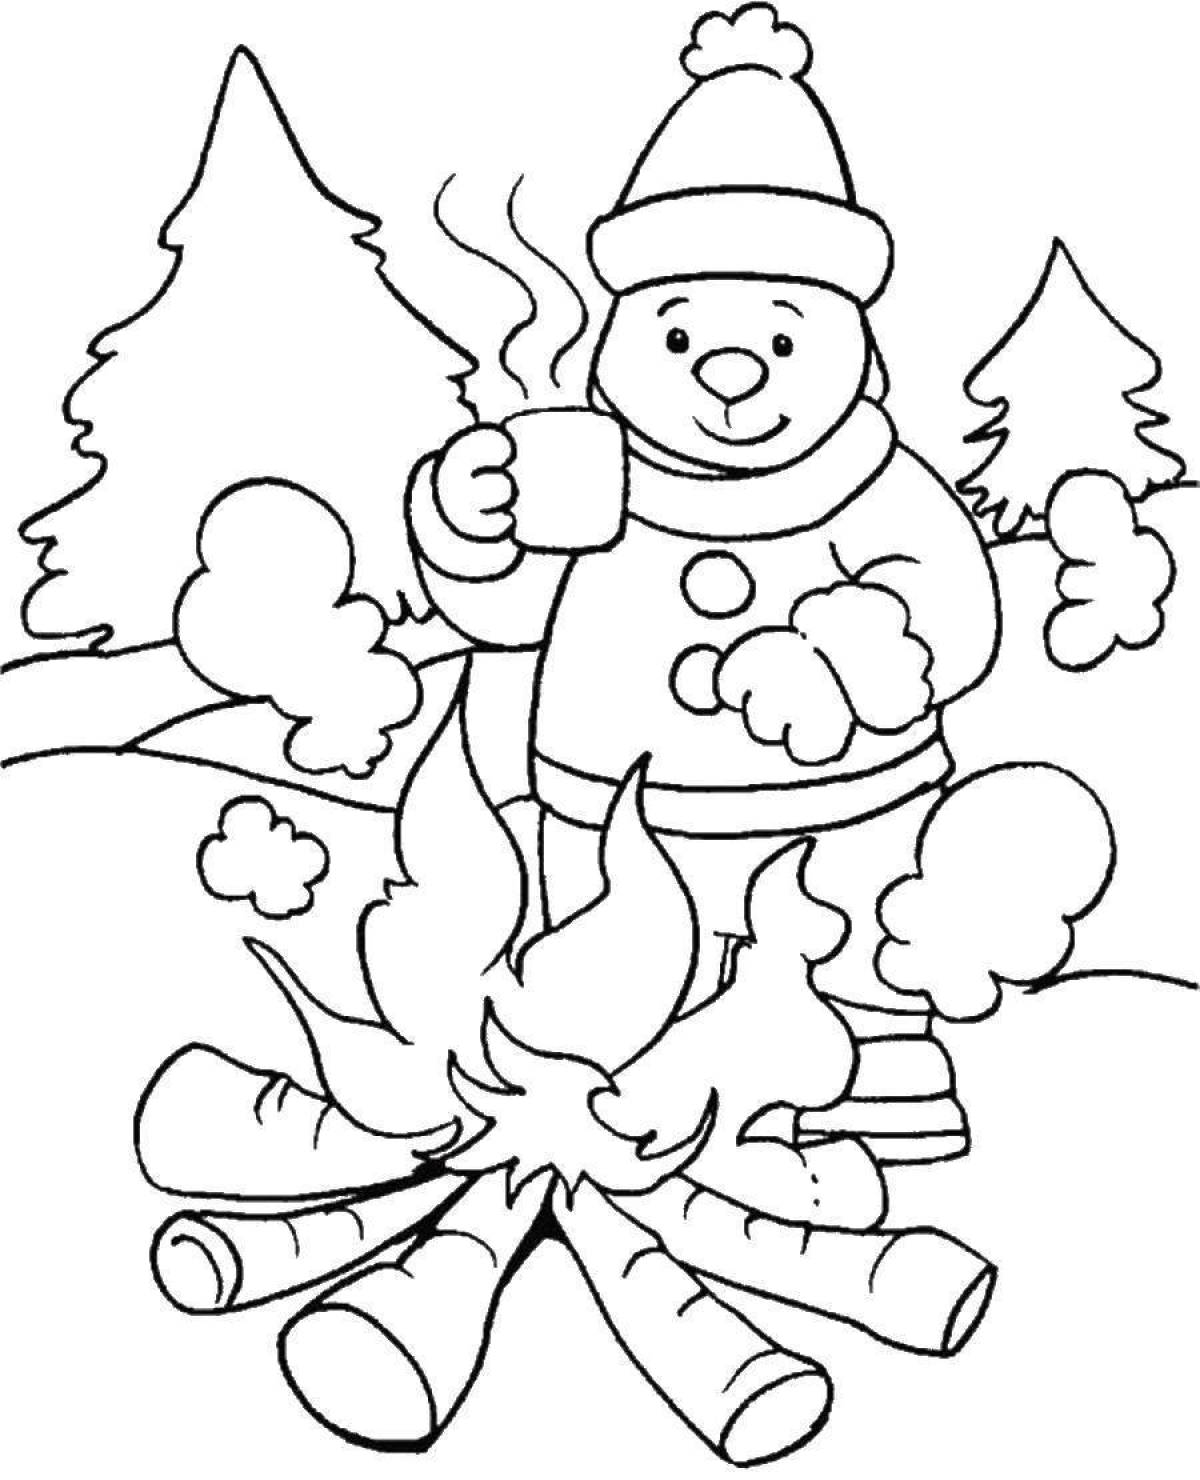 Glorious winter coloring book for children 6-7 years old